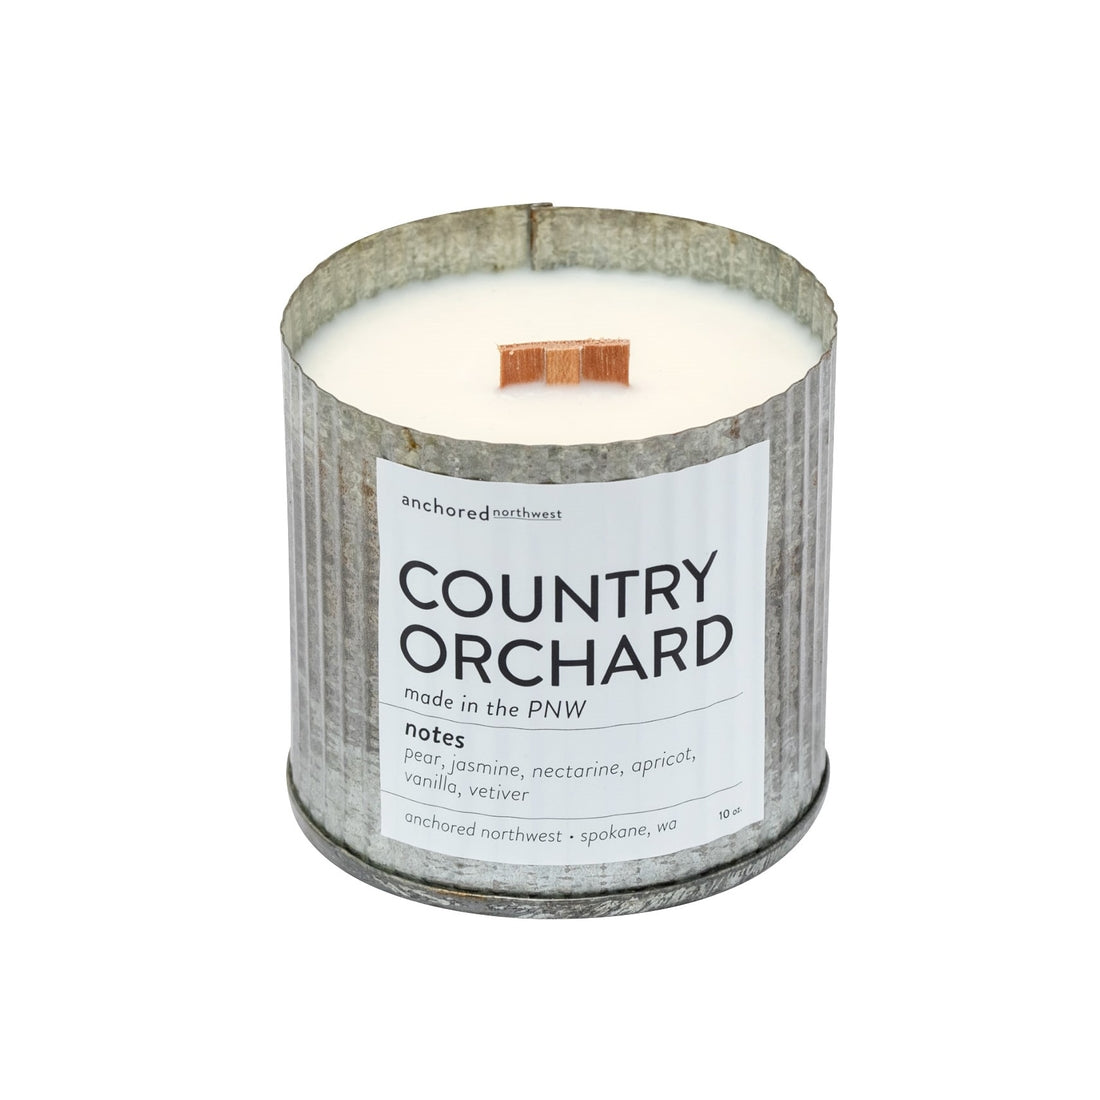 Country Orchard Wood Wick Rustic Farmhouse Soy Candle